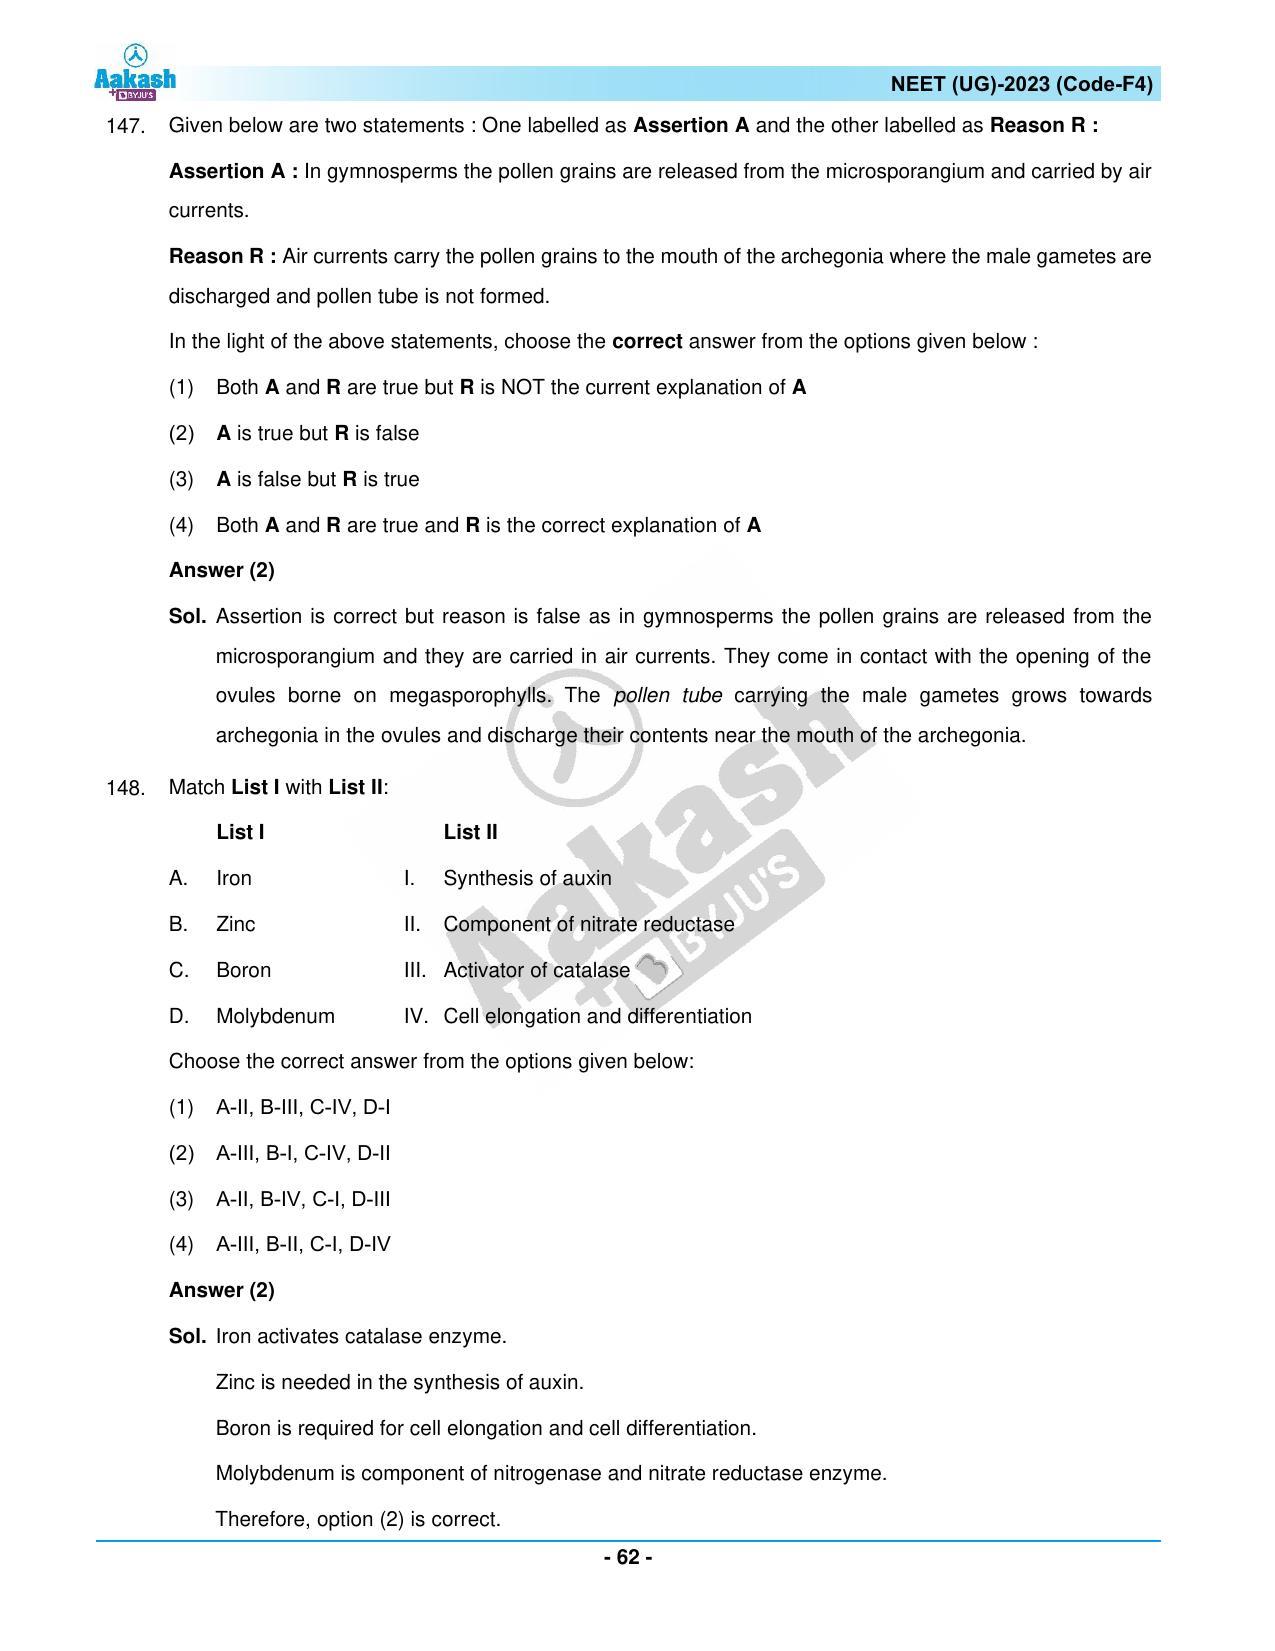 NEET 2023 Question Paper F4 - Page 62